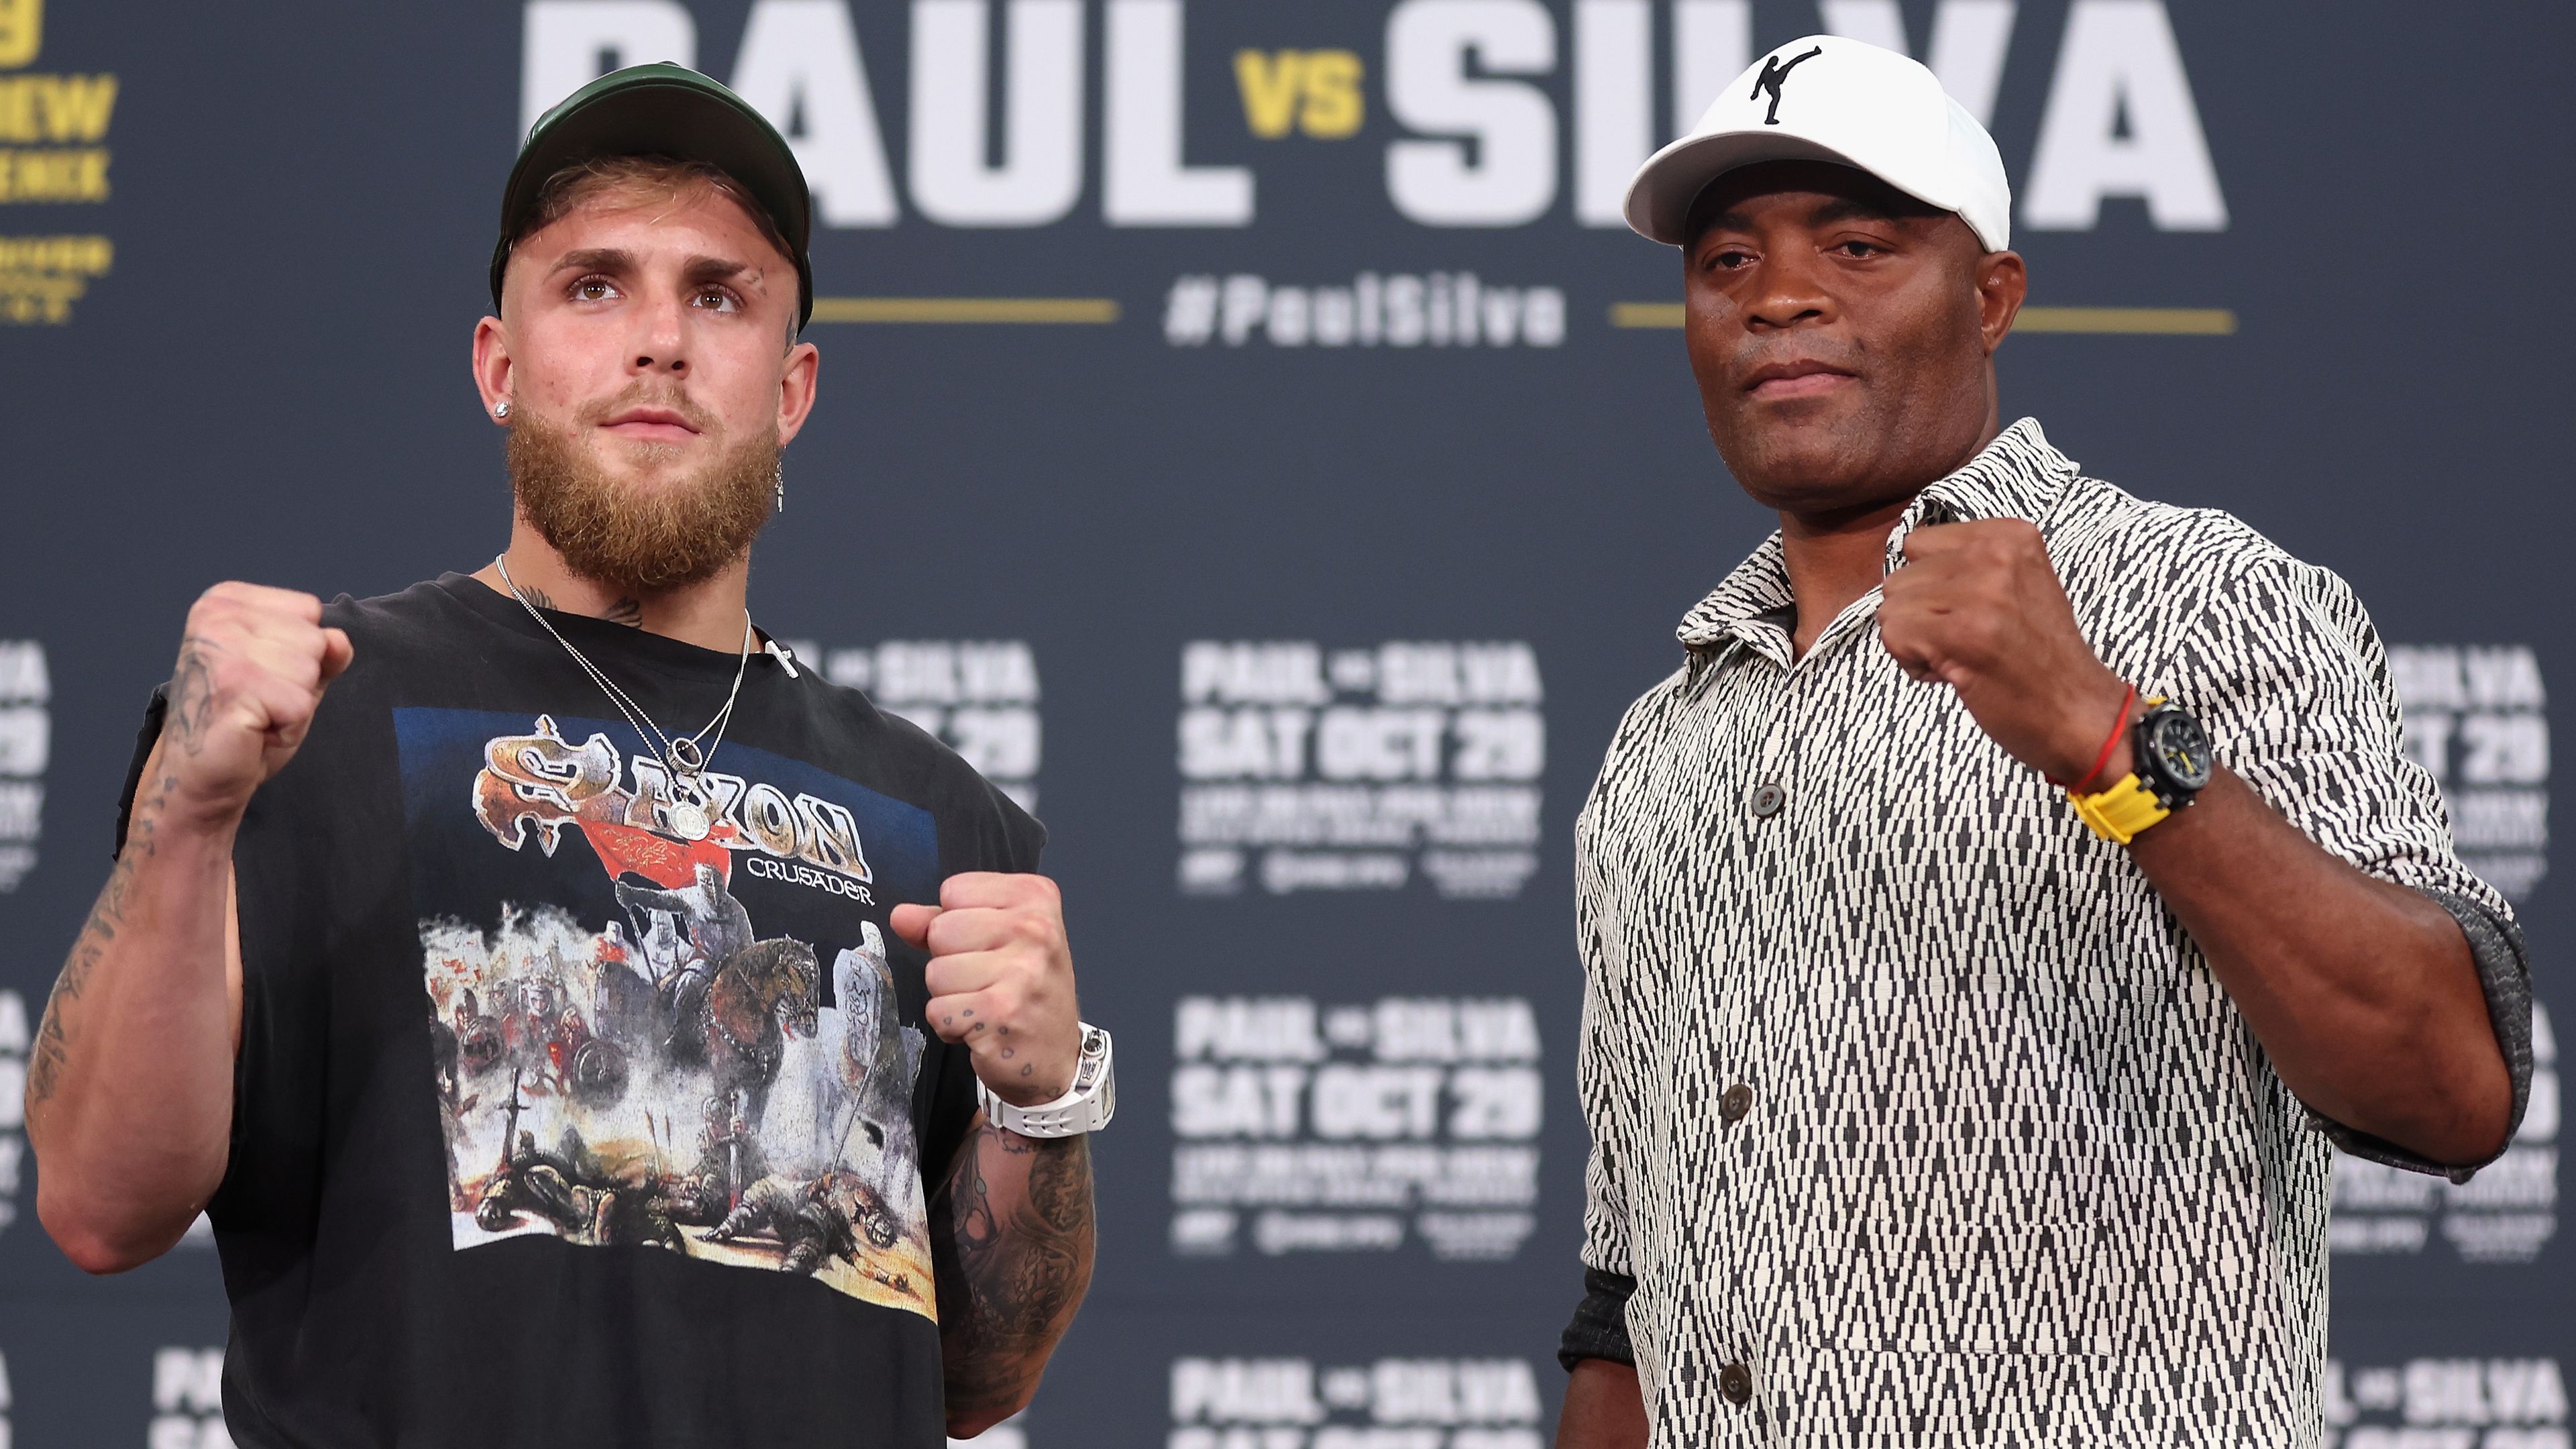 Jake Paul makes outrageous bet with Anderson Silva as combatants prepare to battle in boxing ring